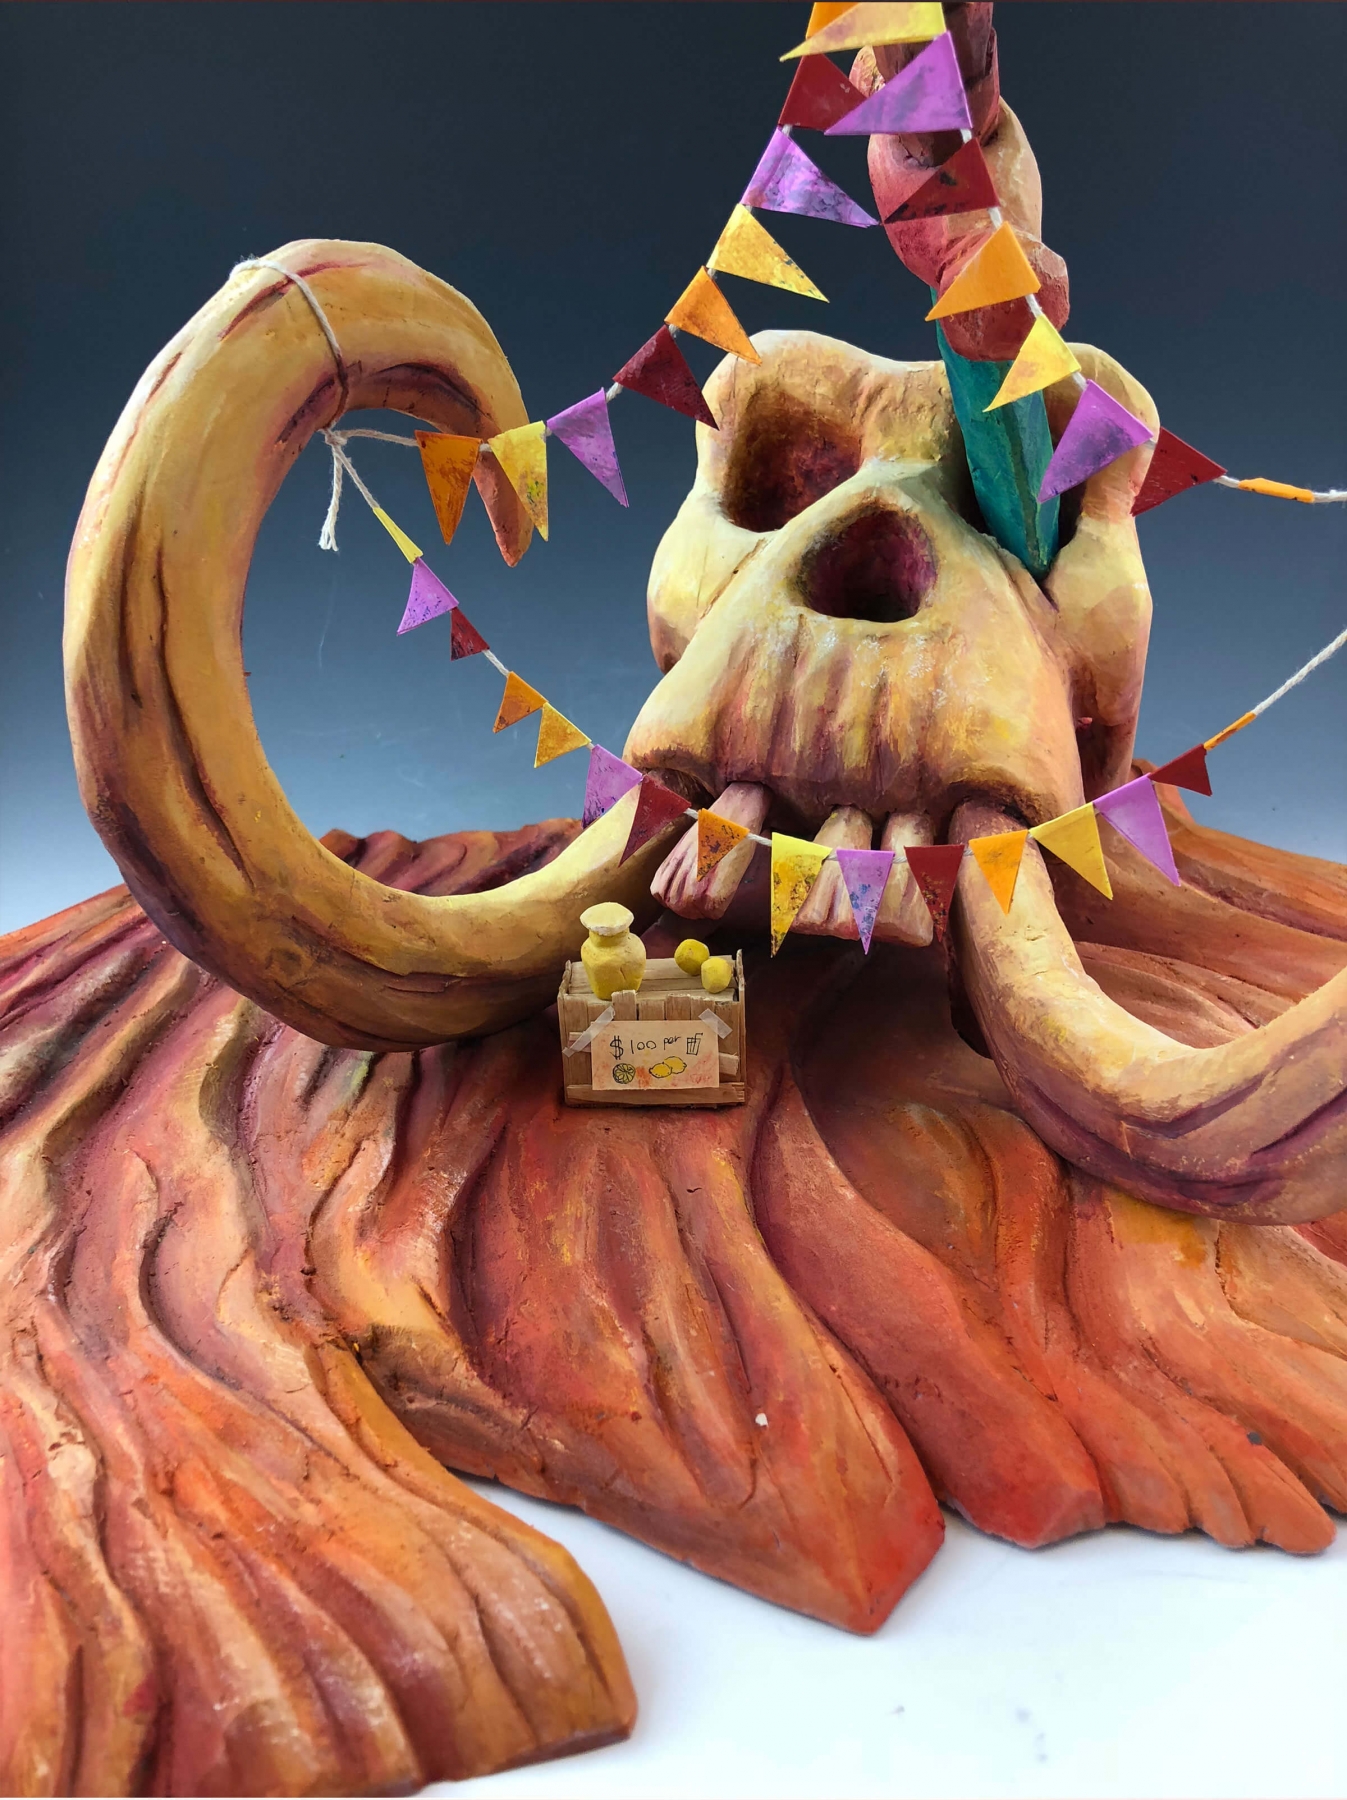 Mammoth skull draped with party flags